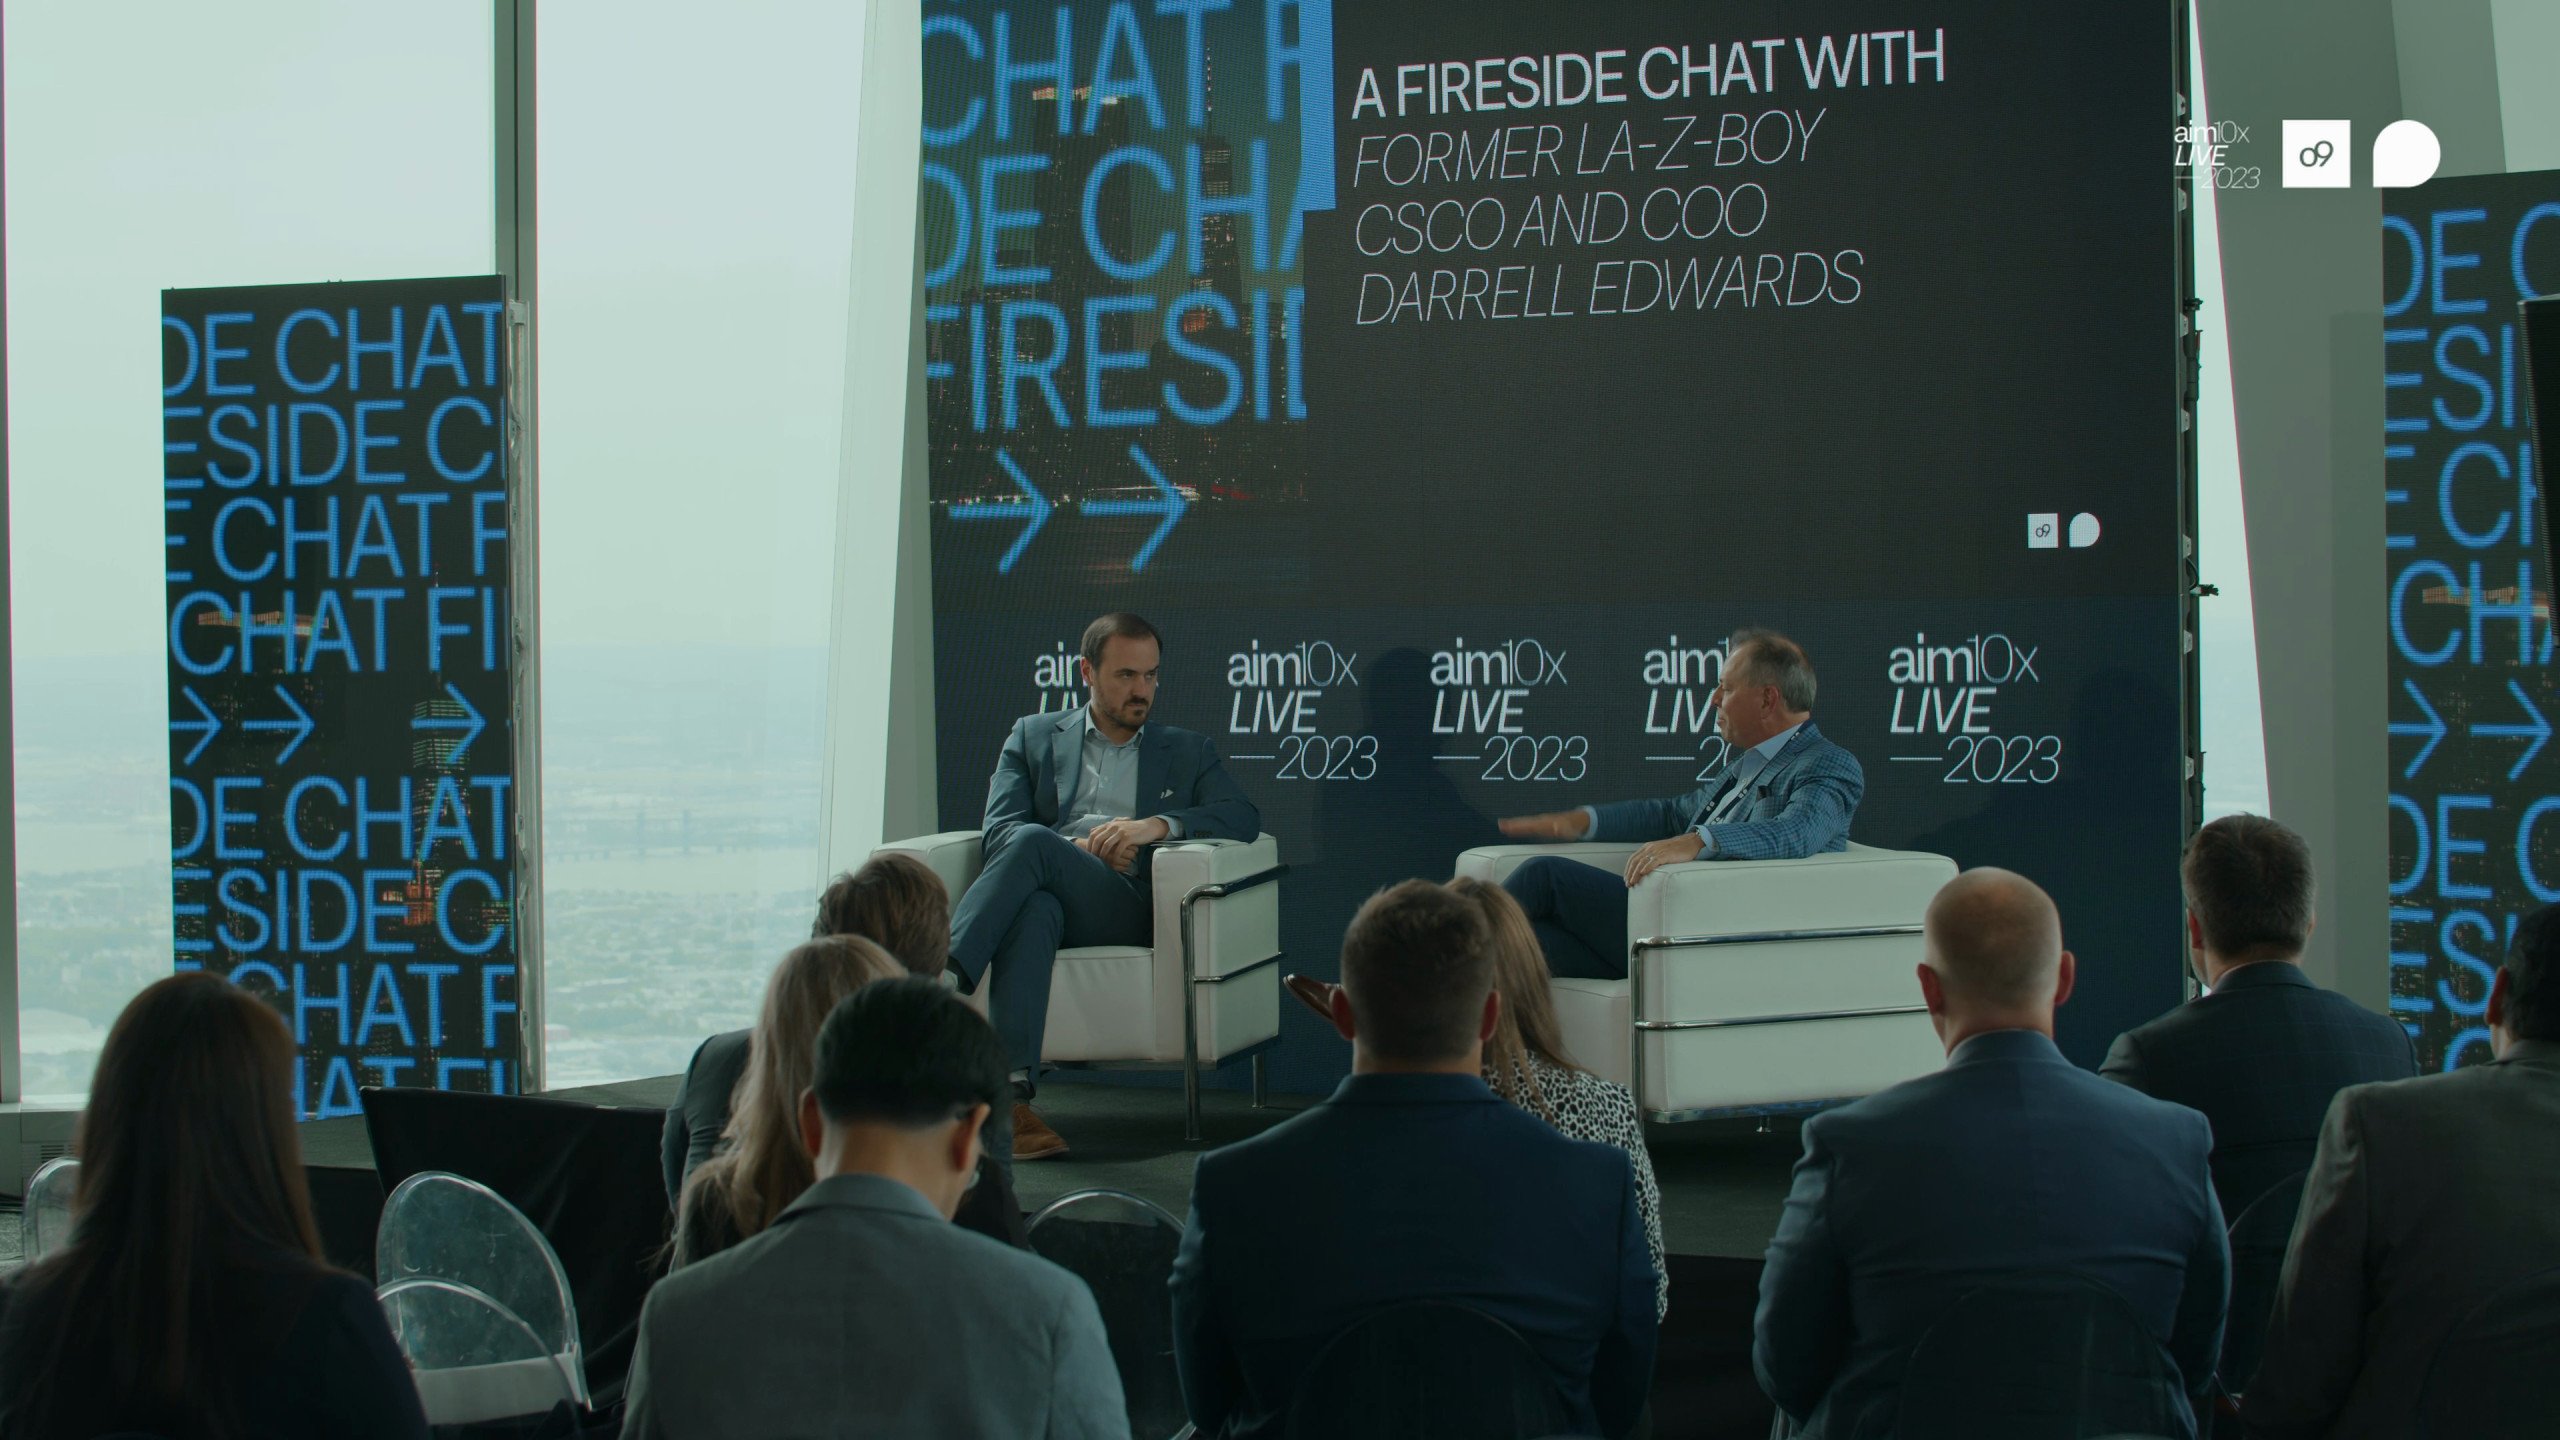 A fireside chat with former la z boy csco and coo darrell edwards thumbnail